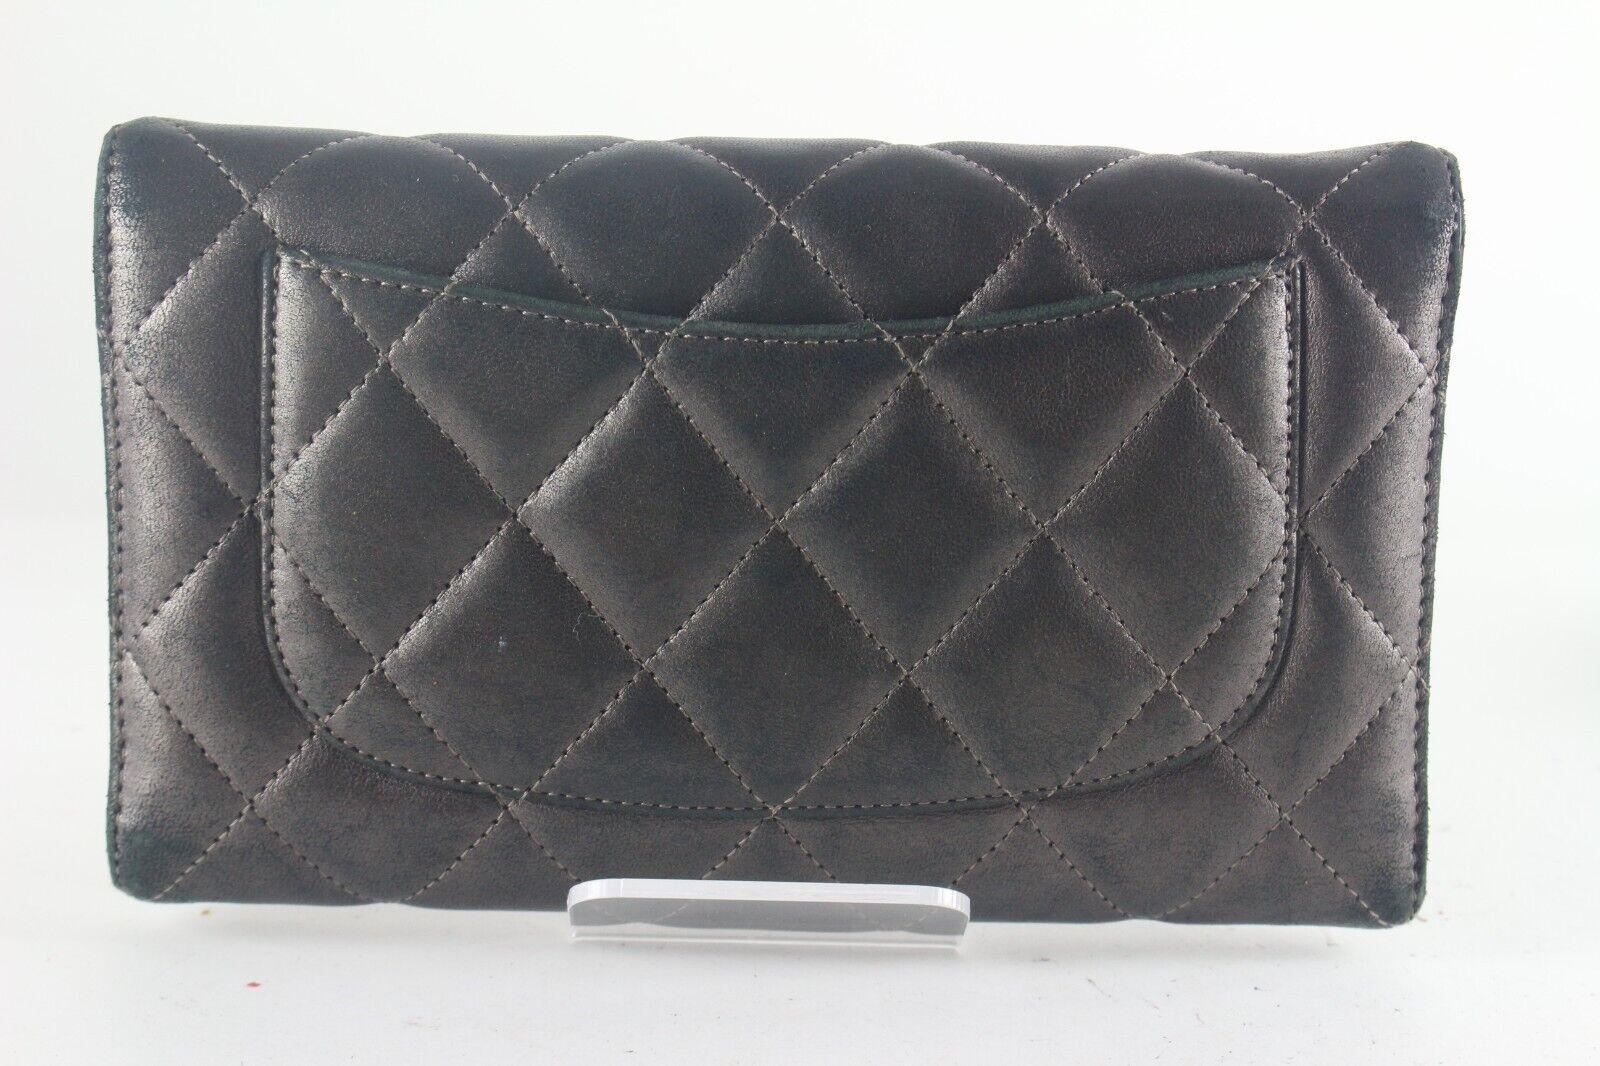 CHANEL Charcoal Grey Leathe Classic Flap Wallet 2CCS725K For Sale 6